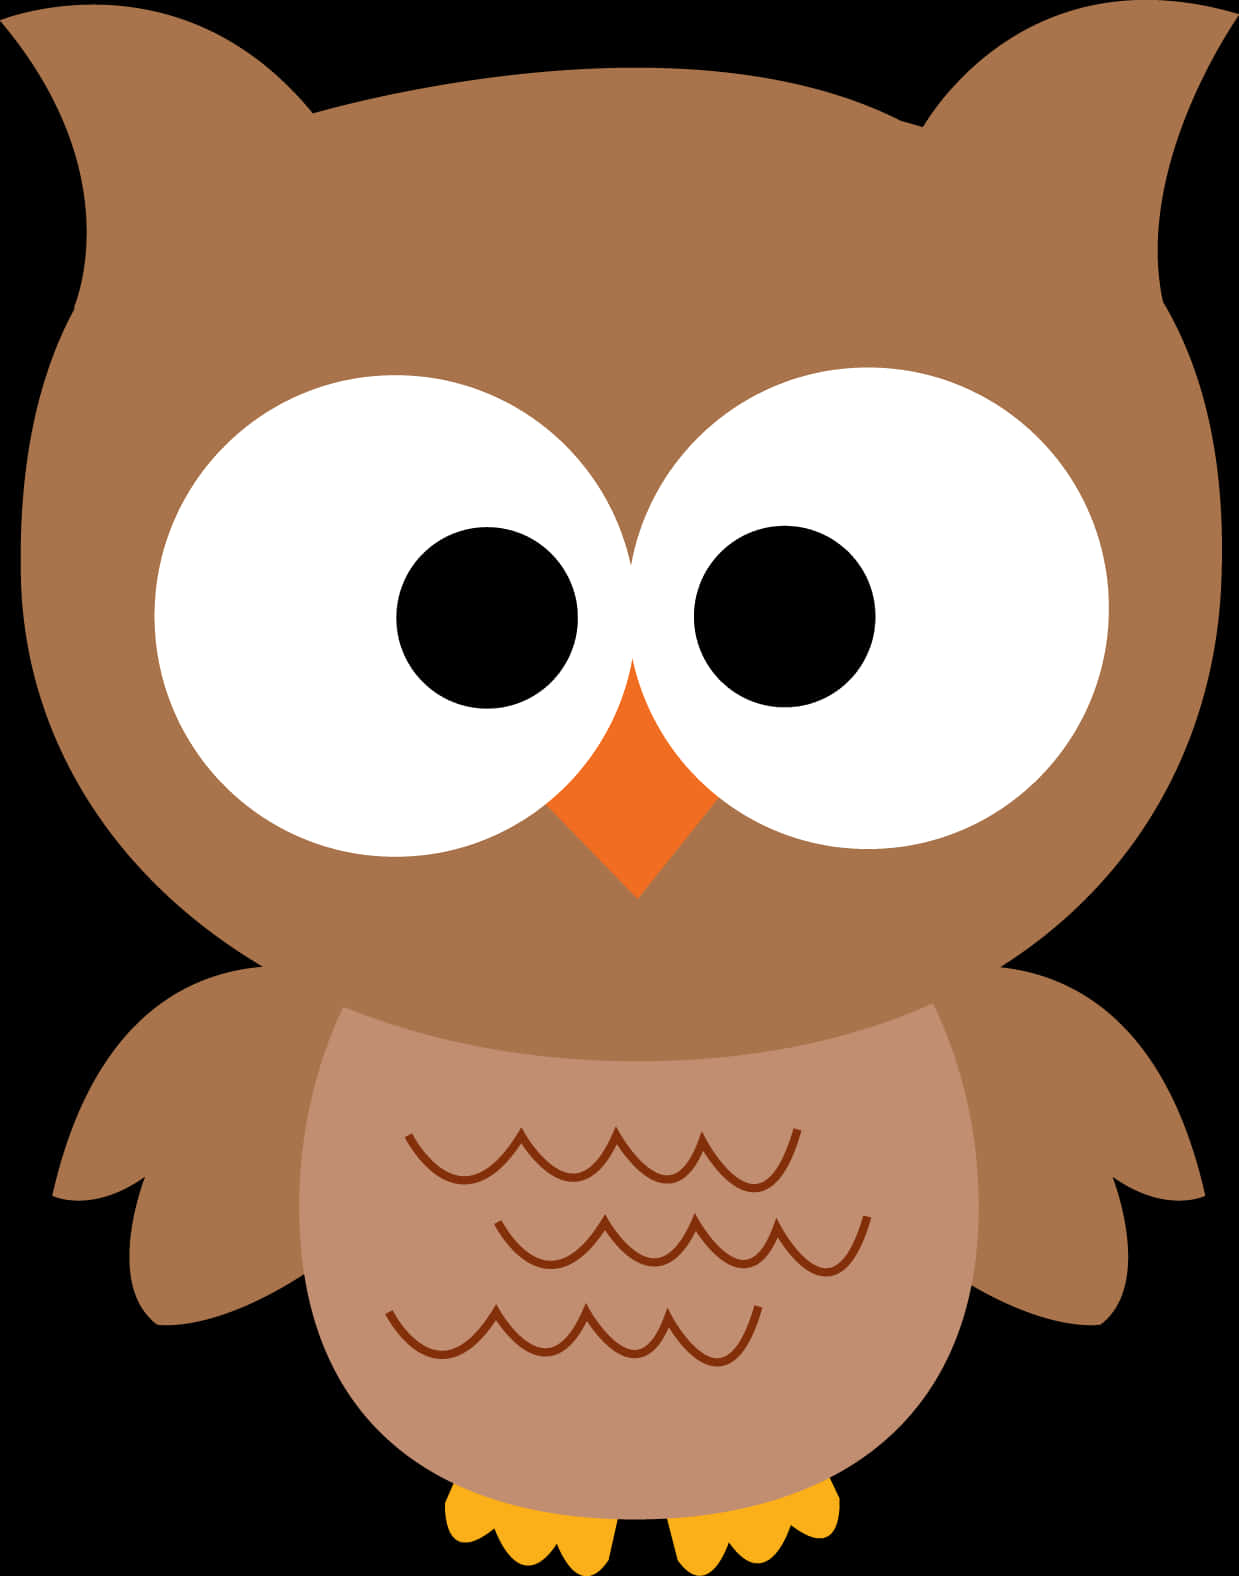 0 Images About Owls On Owl Clip Art And Clip - Clipart Of A Owl, Hd Png Download